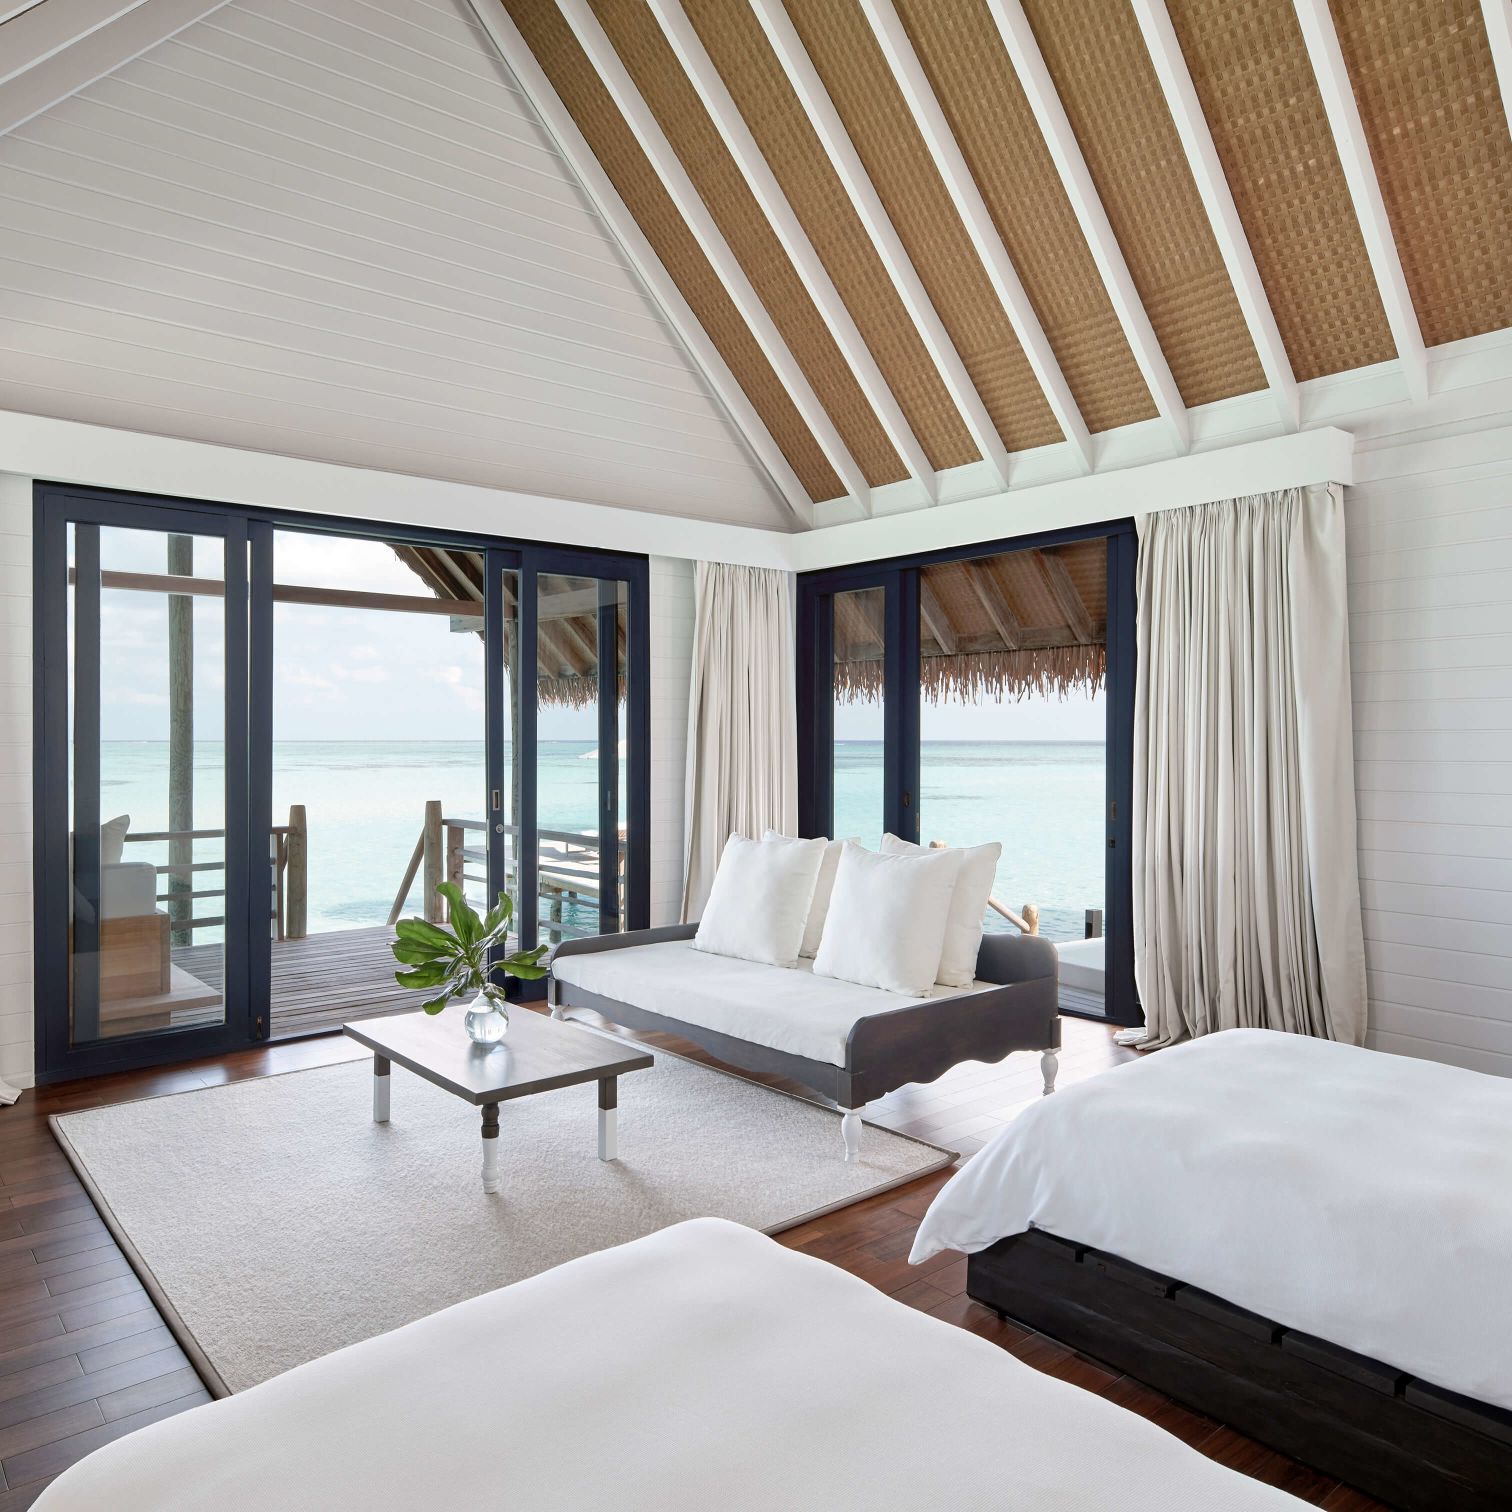 A Room With A Bed And A Table With A View Of The Ocean